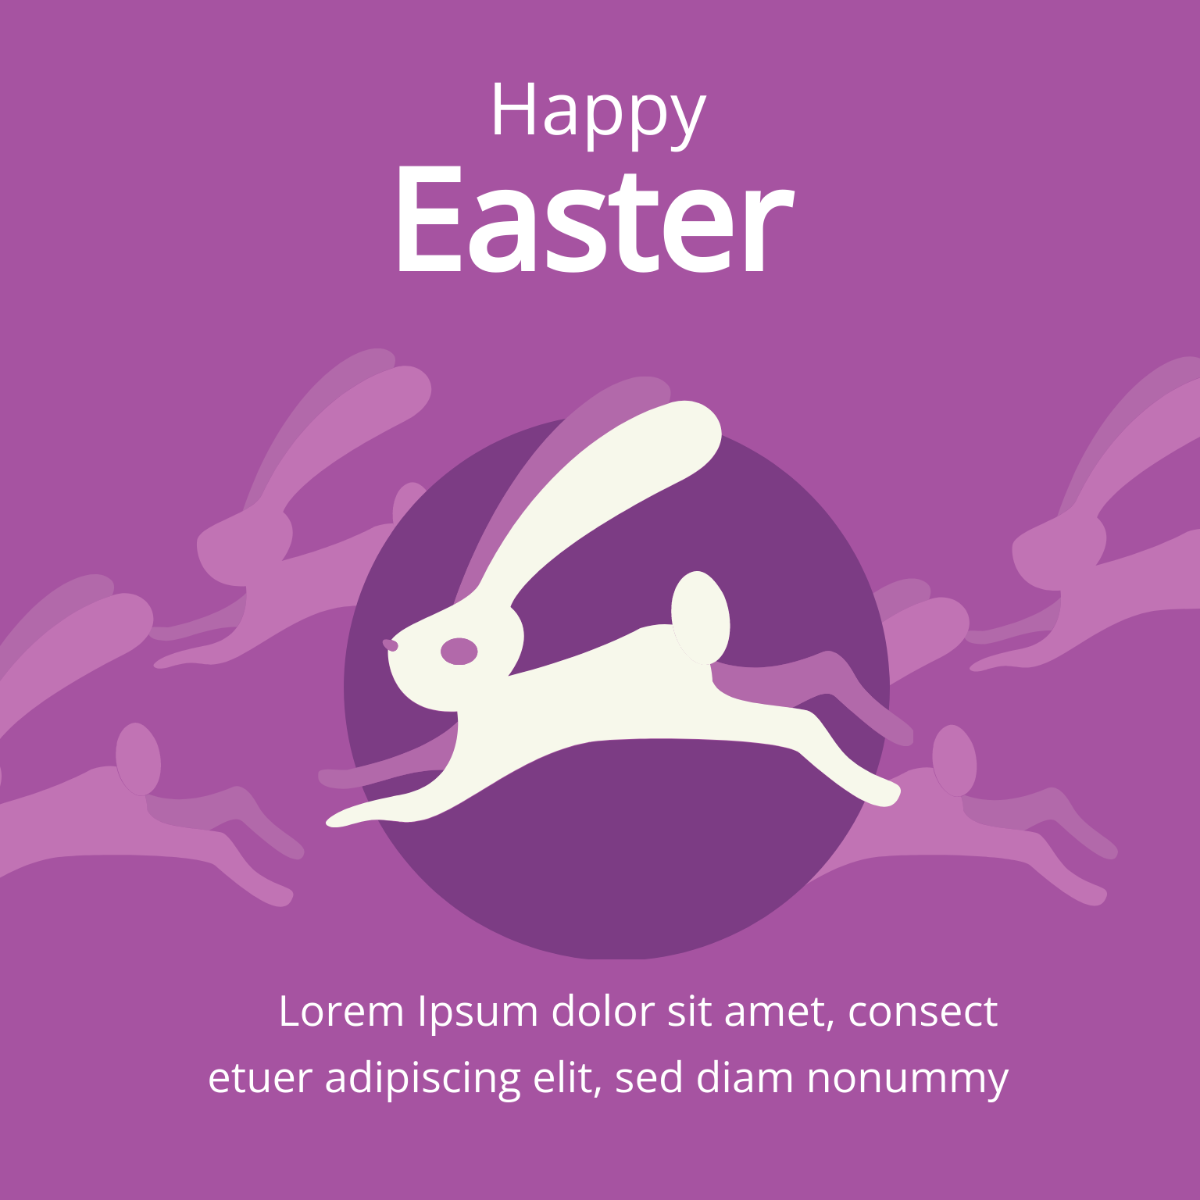 Free Easter Poster Vector Template